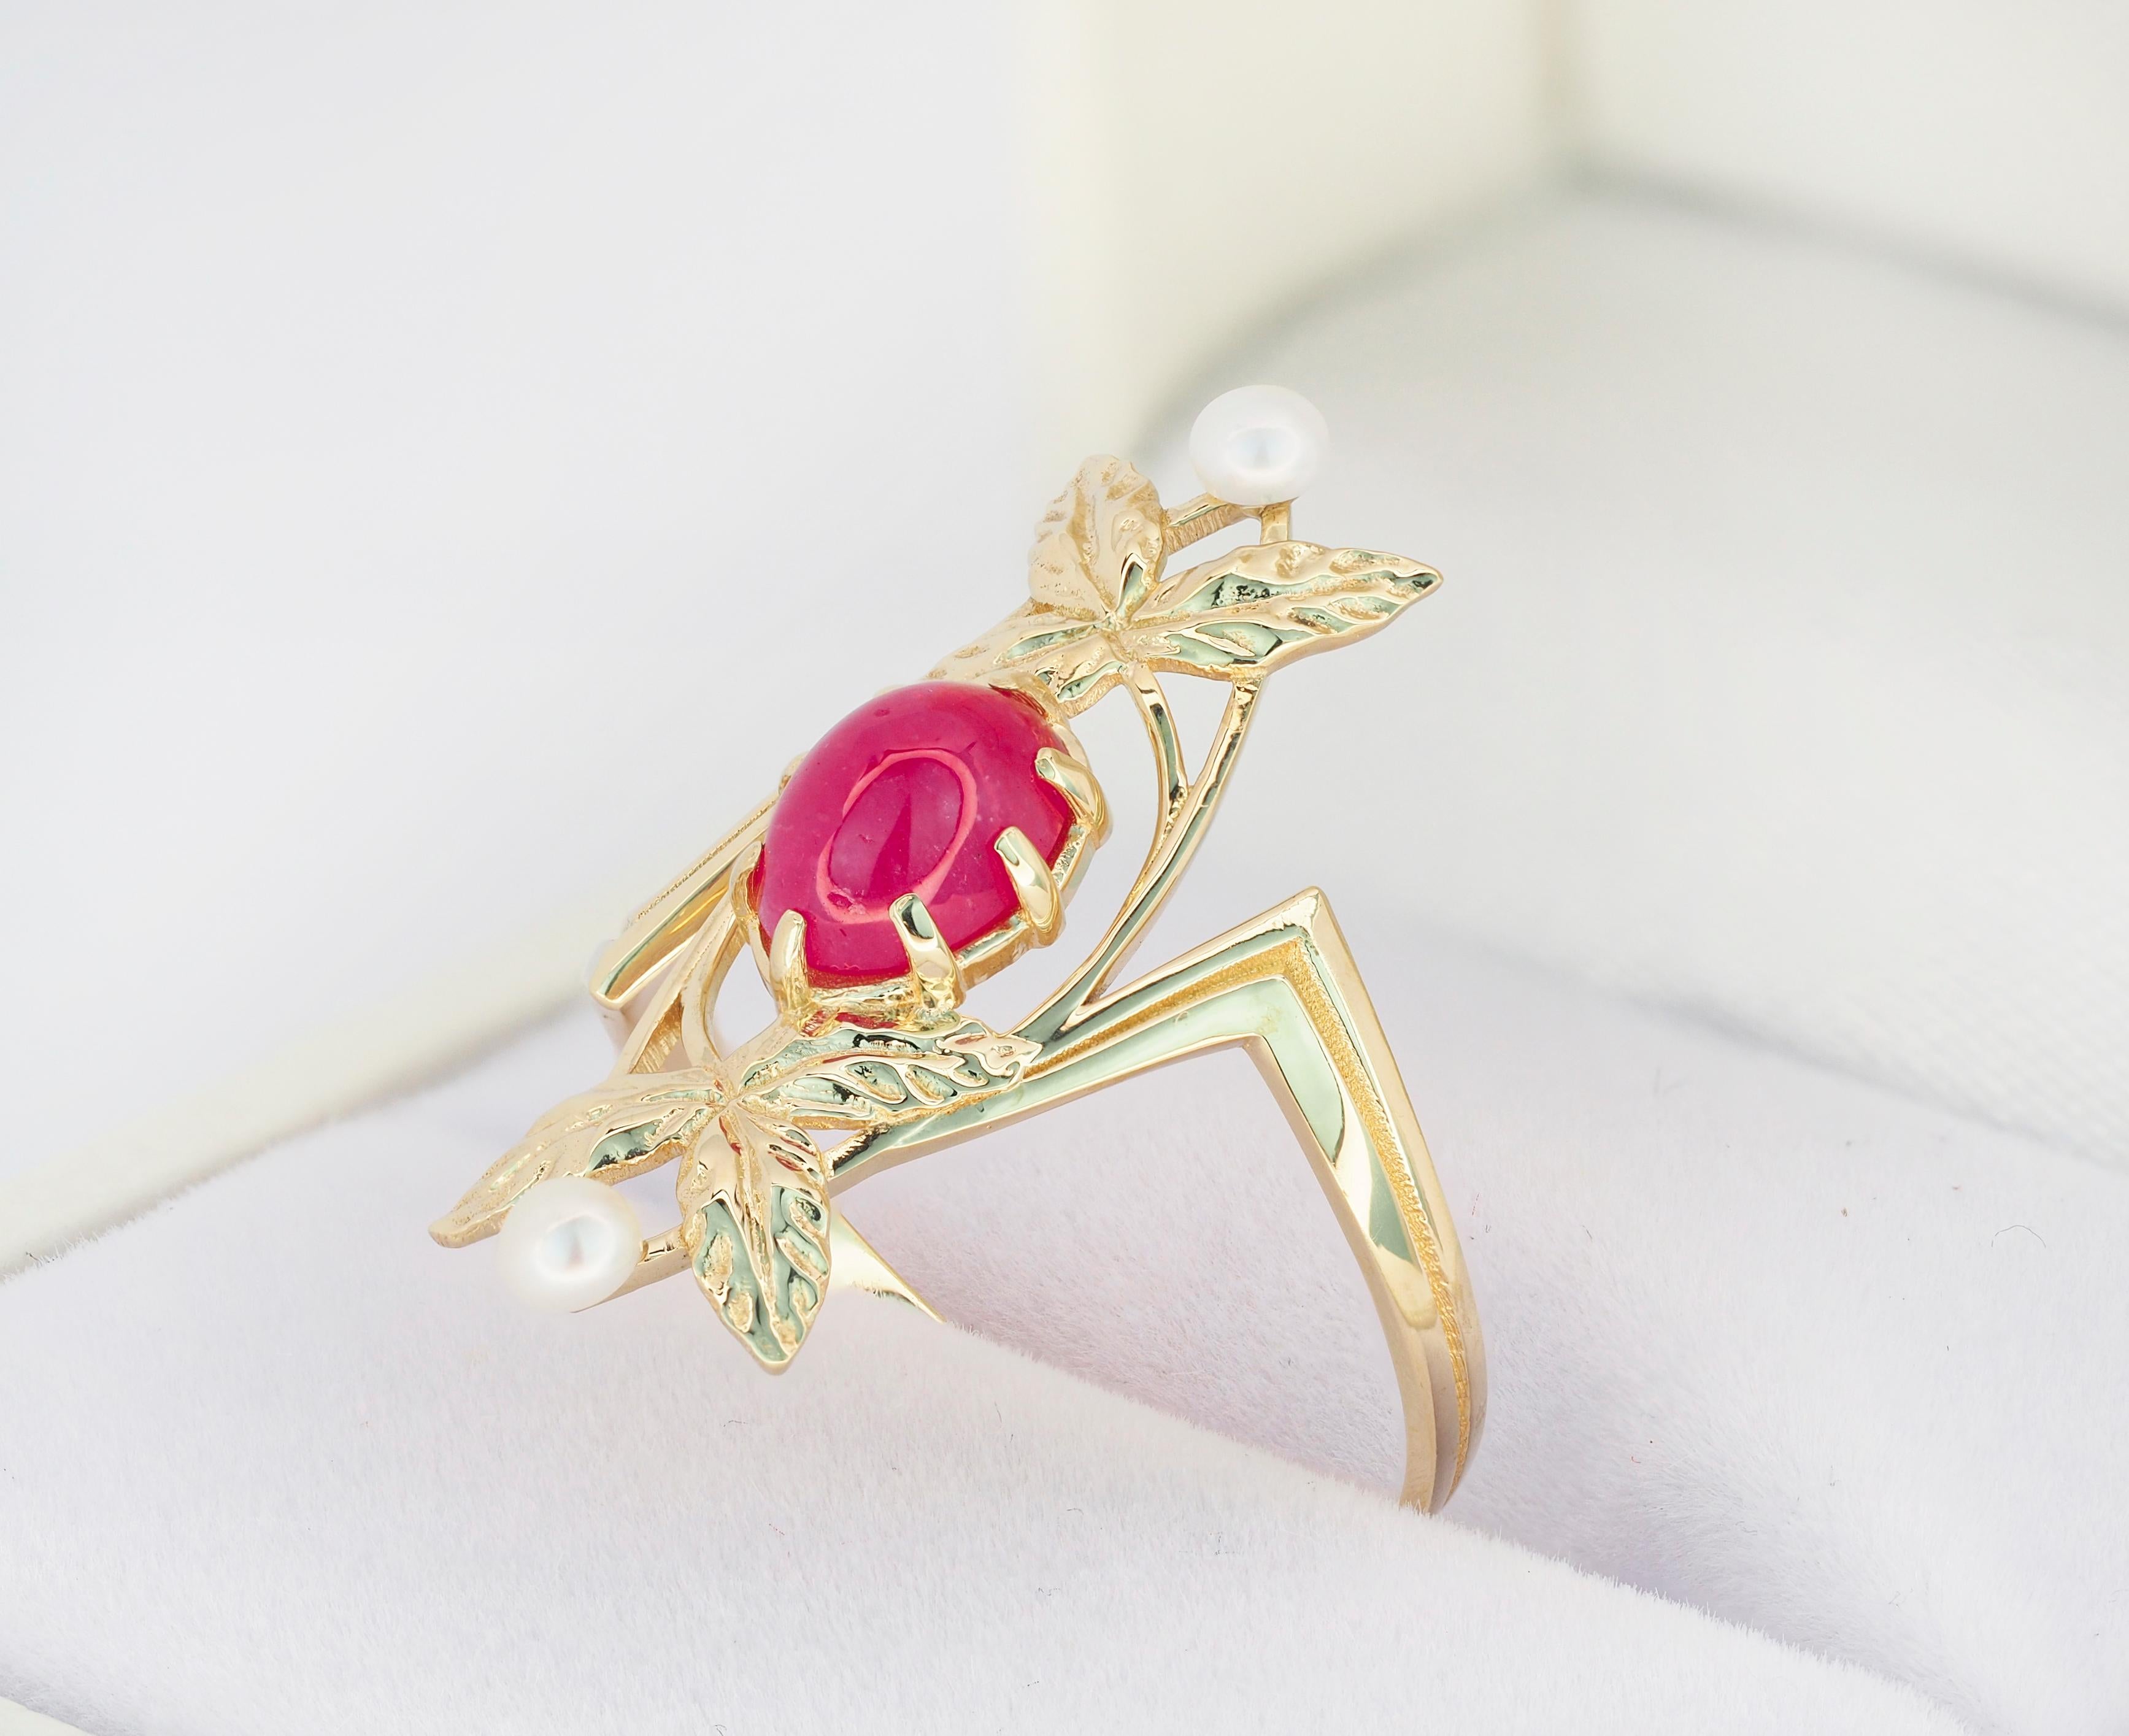 Women's 14k Gold Ring with Ruby and Pearls, Vintage Style Ring with Ruby